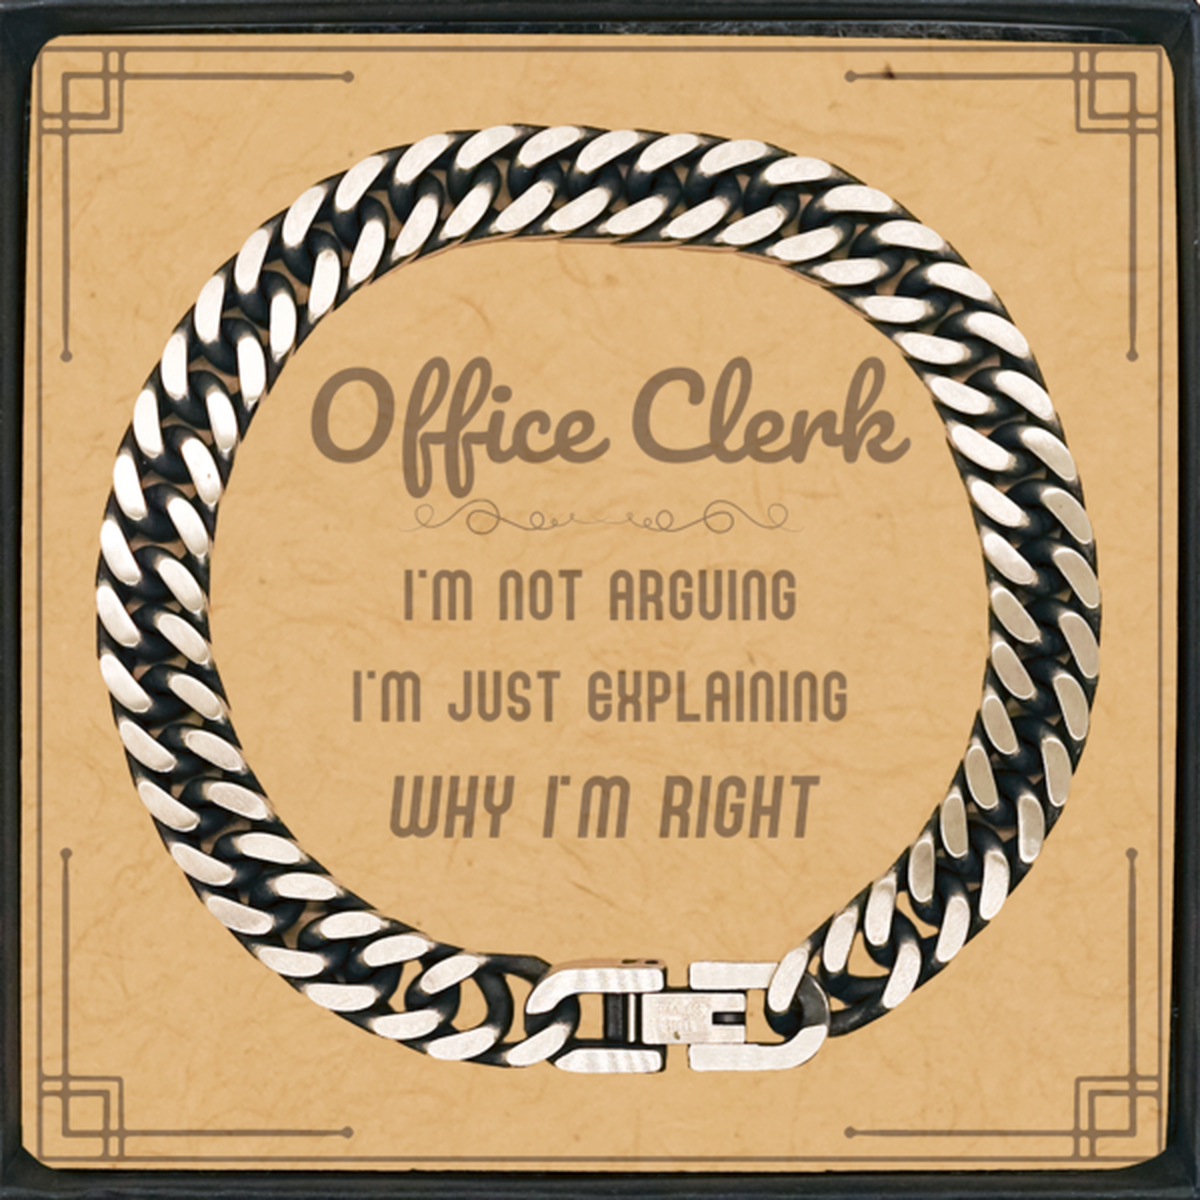 Office Clerk I'm not Arguing. I'm Just Explaining Why I'm RIGHT Cuban Link Chain Bracelet, Funny Saying Quote Office Clerk Gifts For Office Clerk Message Card Graduation Birthday Christmas Gifts for Men Women Coworker